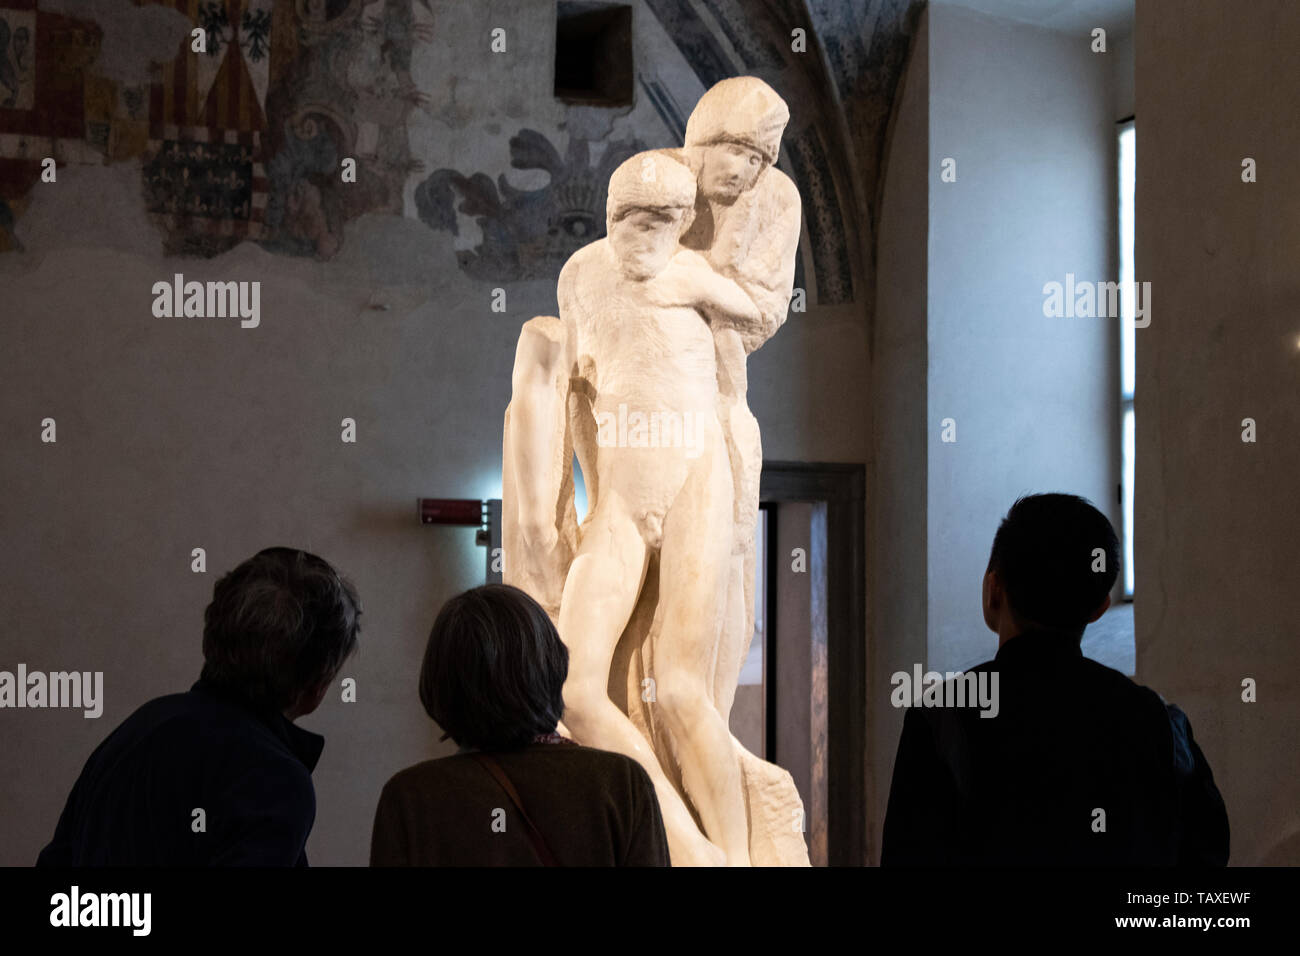 Sforza Castle, museum, Milan: people in front of The Rondanini Pietà, sculpture that Michelangelo worked on from 1552 until his death in 1564 Stock Photo